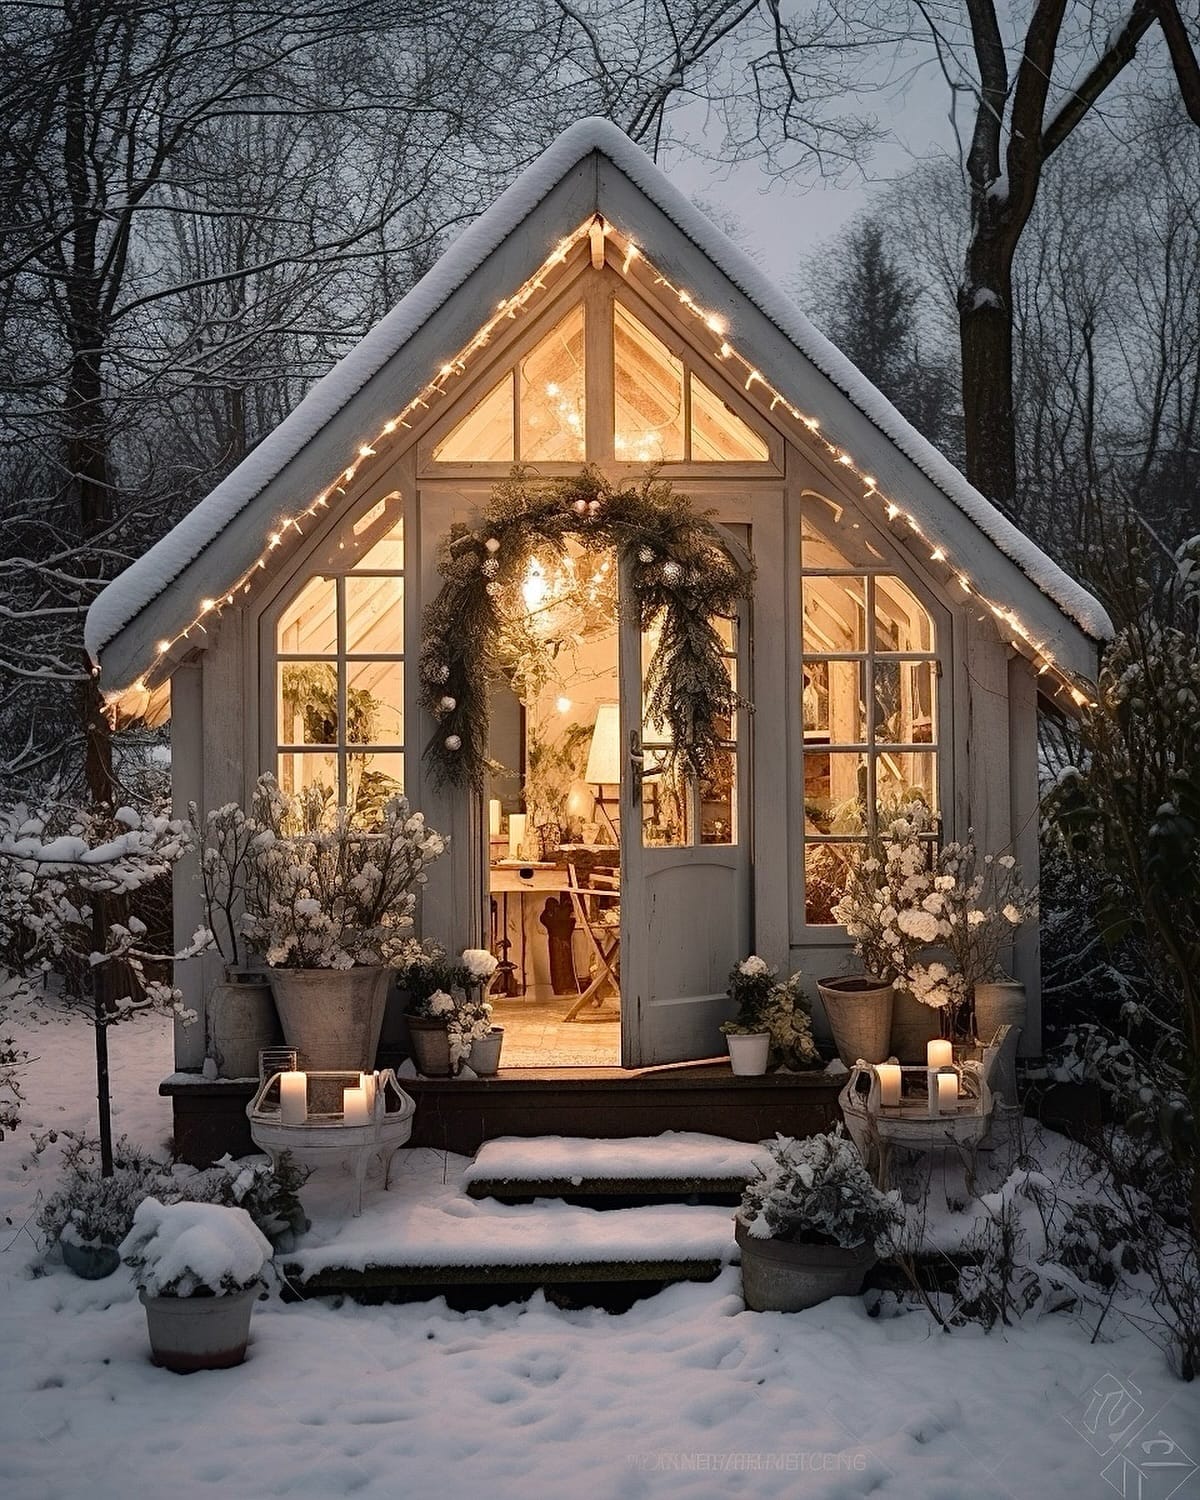 AI designed Christmas decorated cozy cottage in the woods glowing from the many windows - via MERRY CHRISTMAS. #aidesign #christmascottage #cozywinter